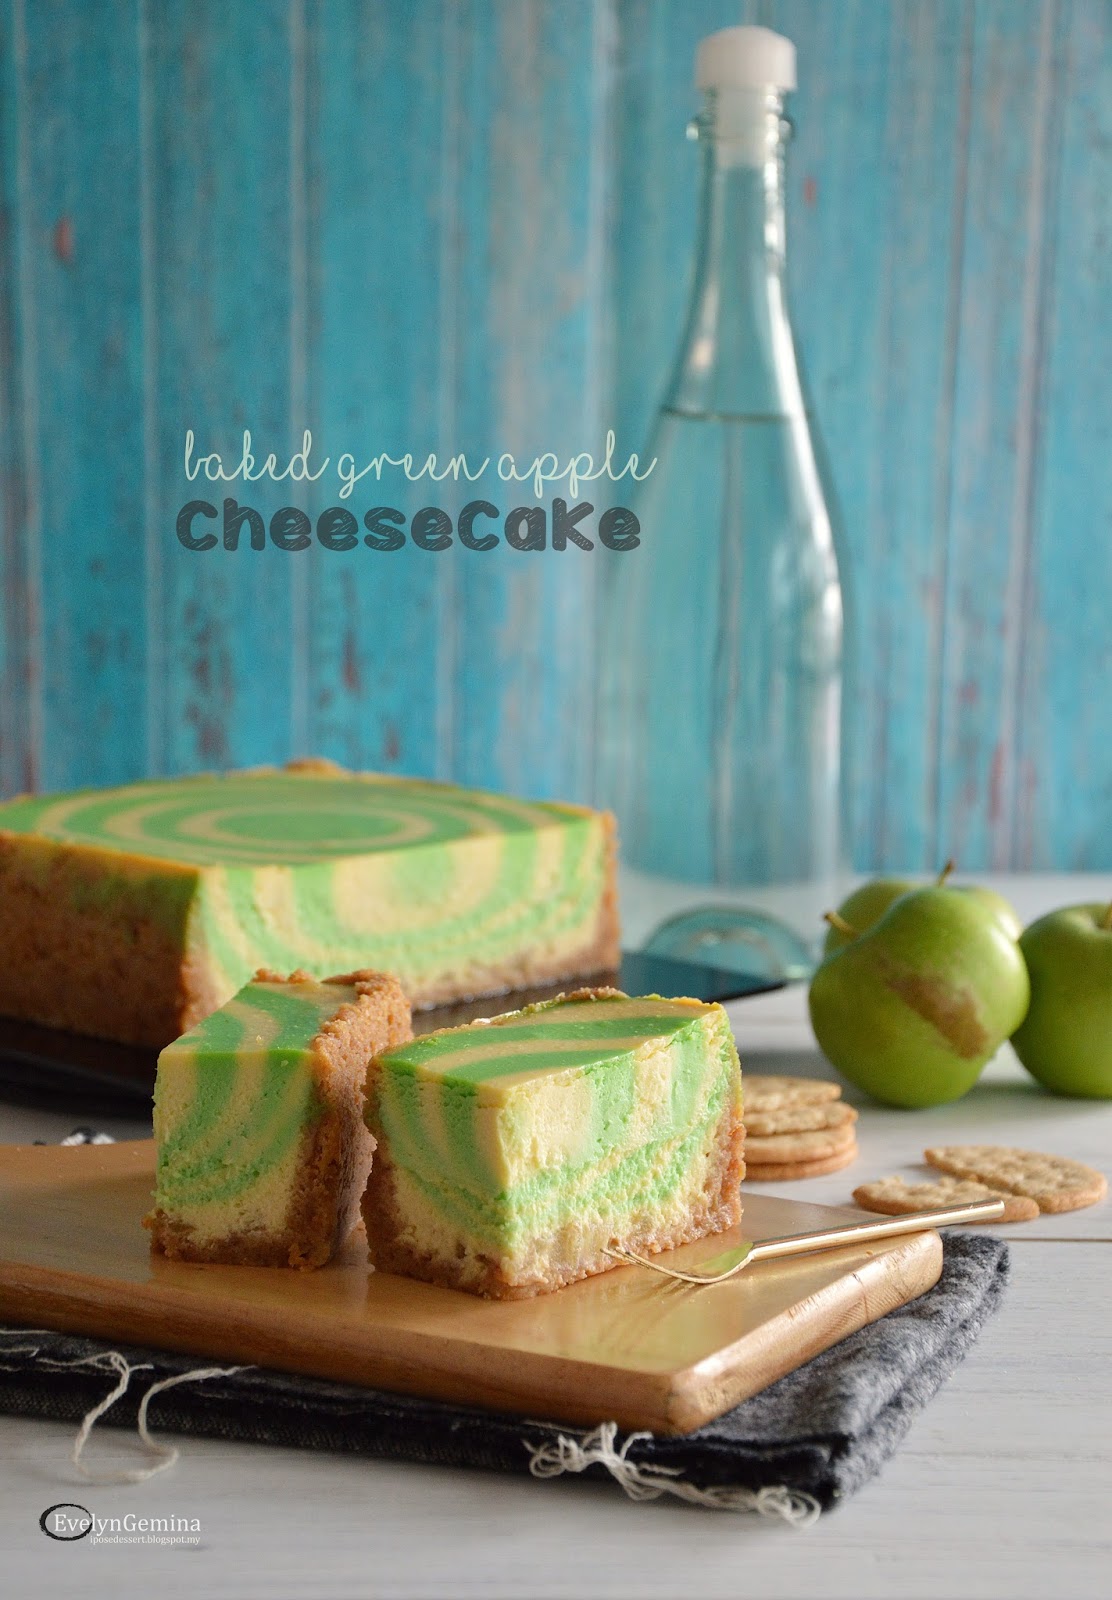 BAKED GREEN APPLE CHEESECAKE